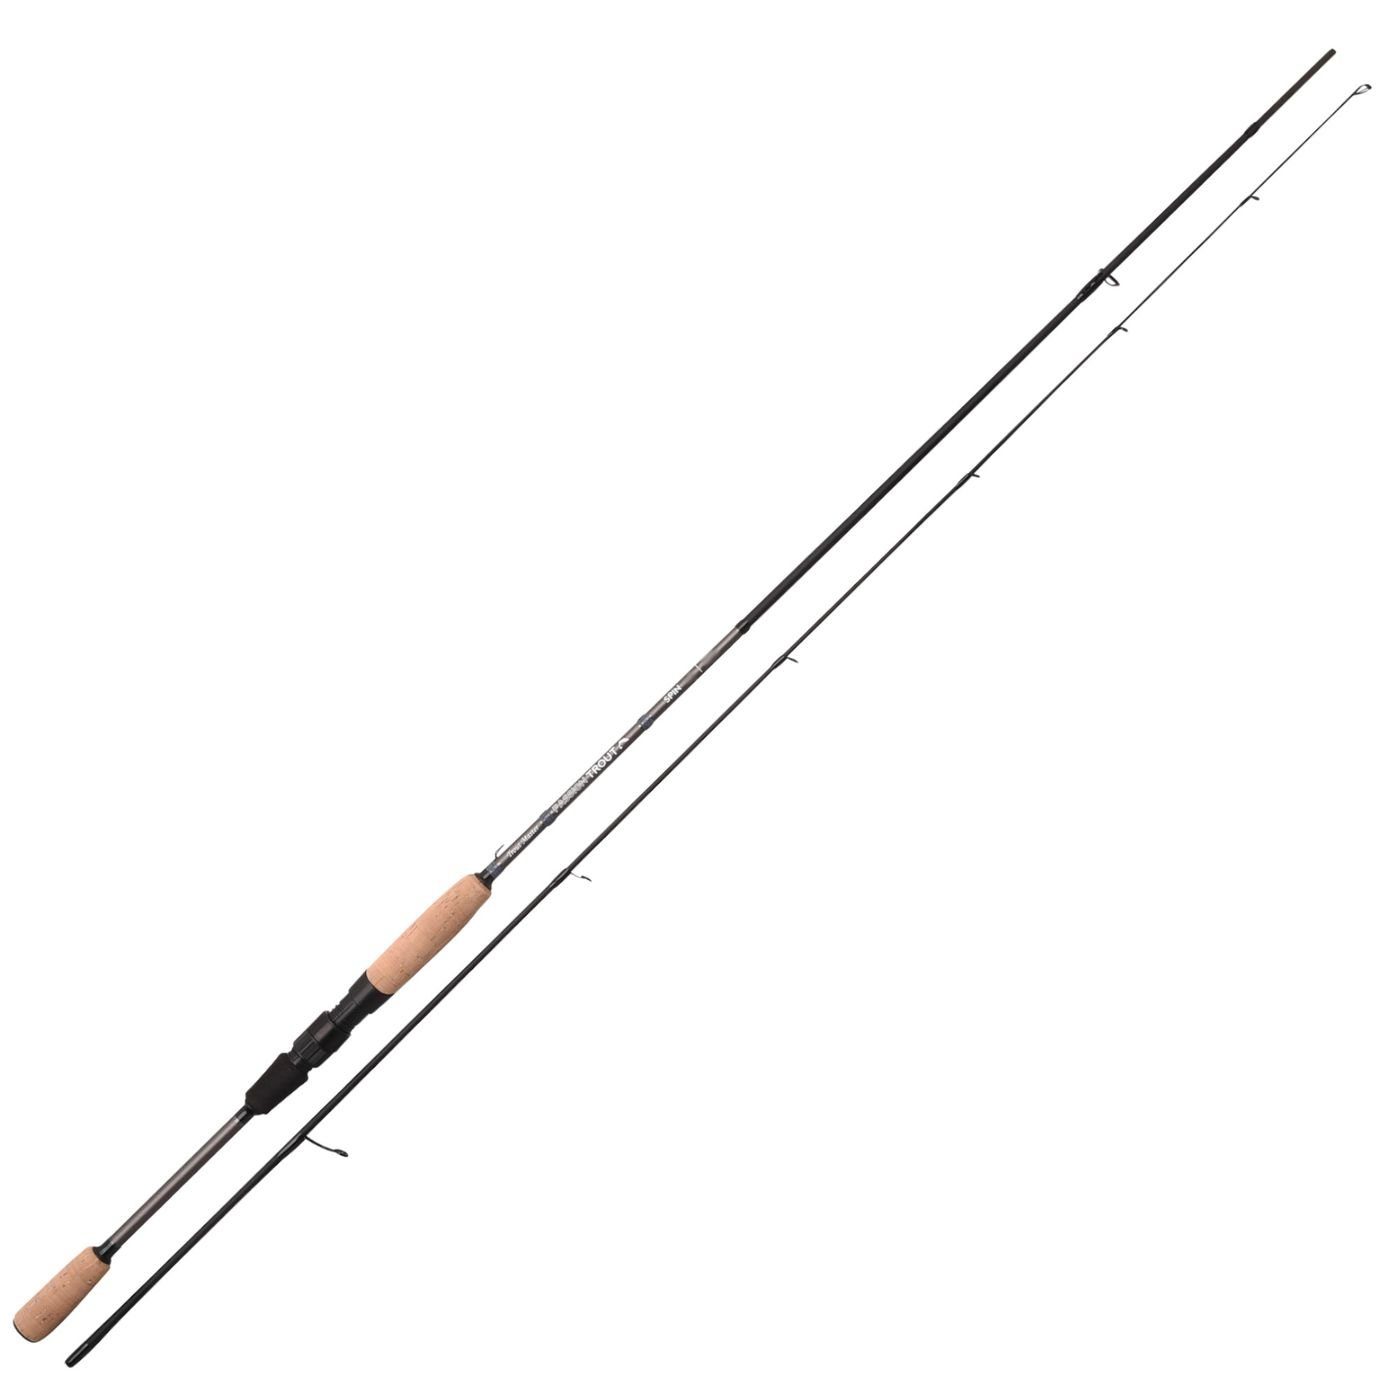 Trout Master Forellenrute Passion Trout Spin 2,40m 3-10g - Forellenrute